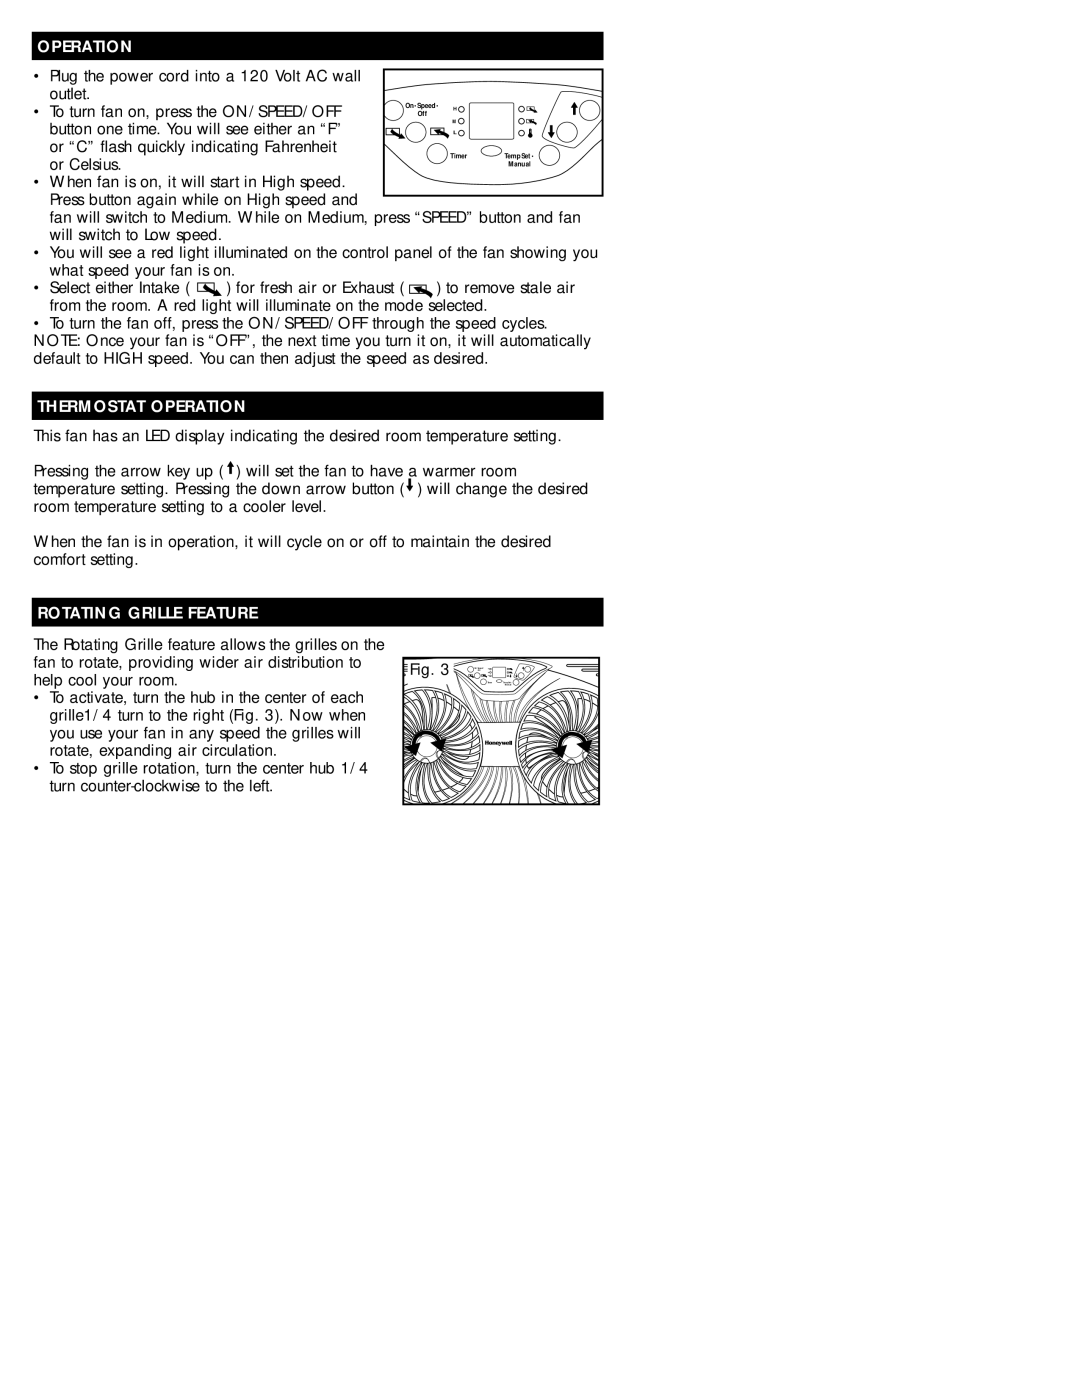 Honeywell HW-500C Series owner manual outlet, To turn fan on, press the ON/SPEED/OFF, or Celsius, Thermostat Operation 